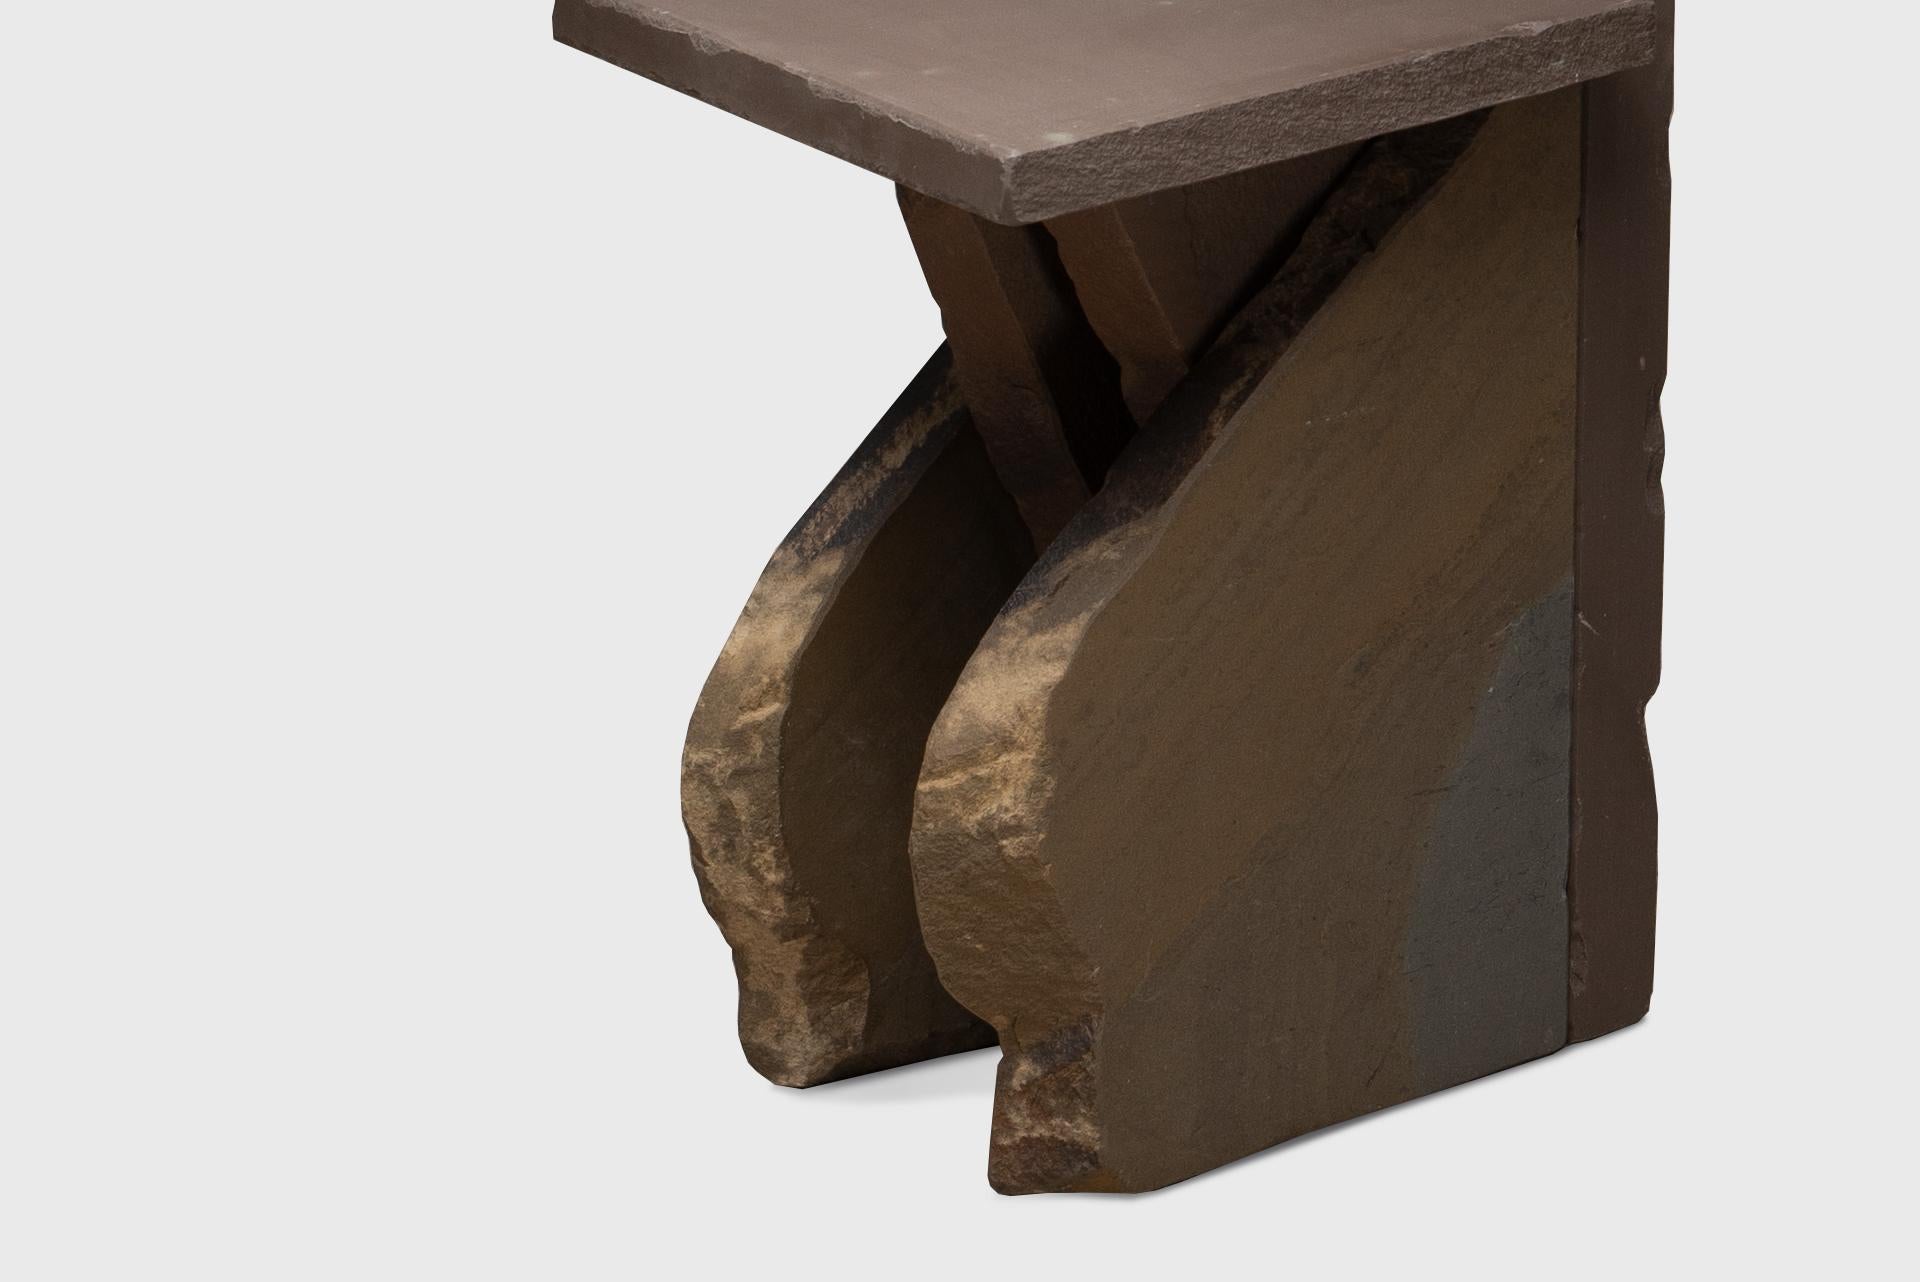 German Contemporary Natural Chair 23, Graywacke Offcut Gray Stone, Carsten in Der Elst For Sale